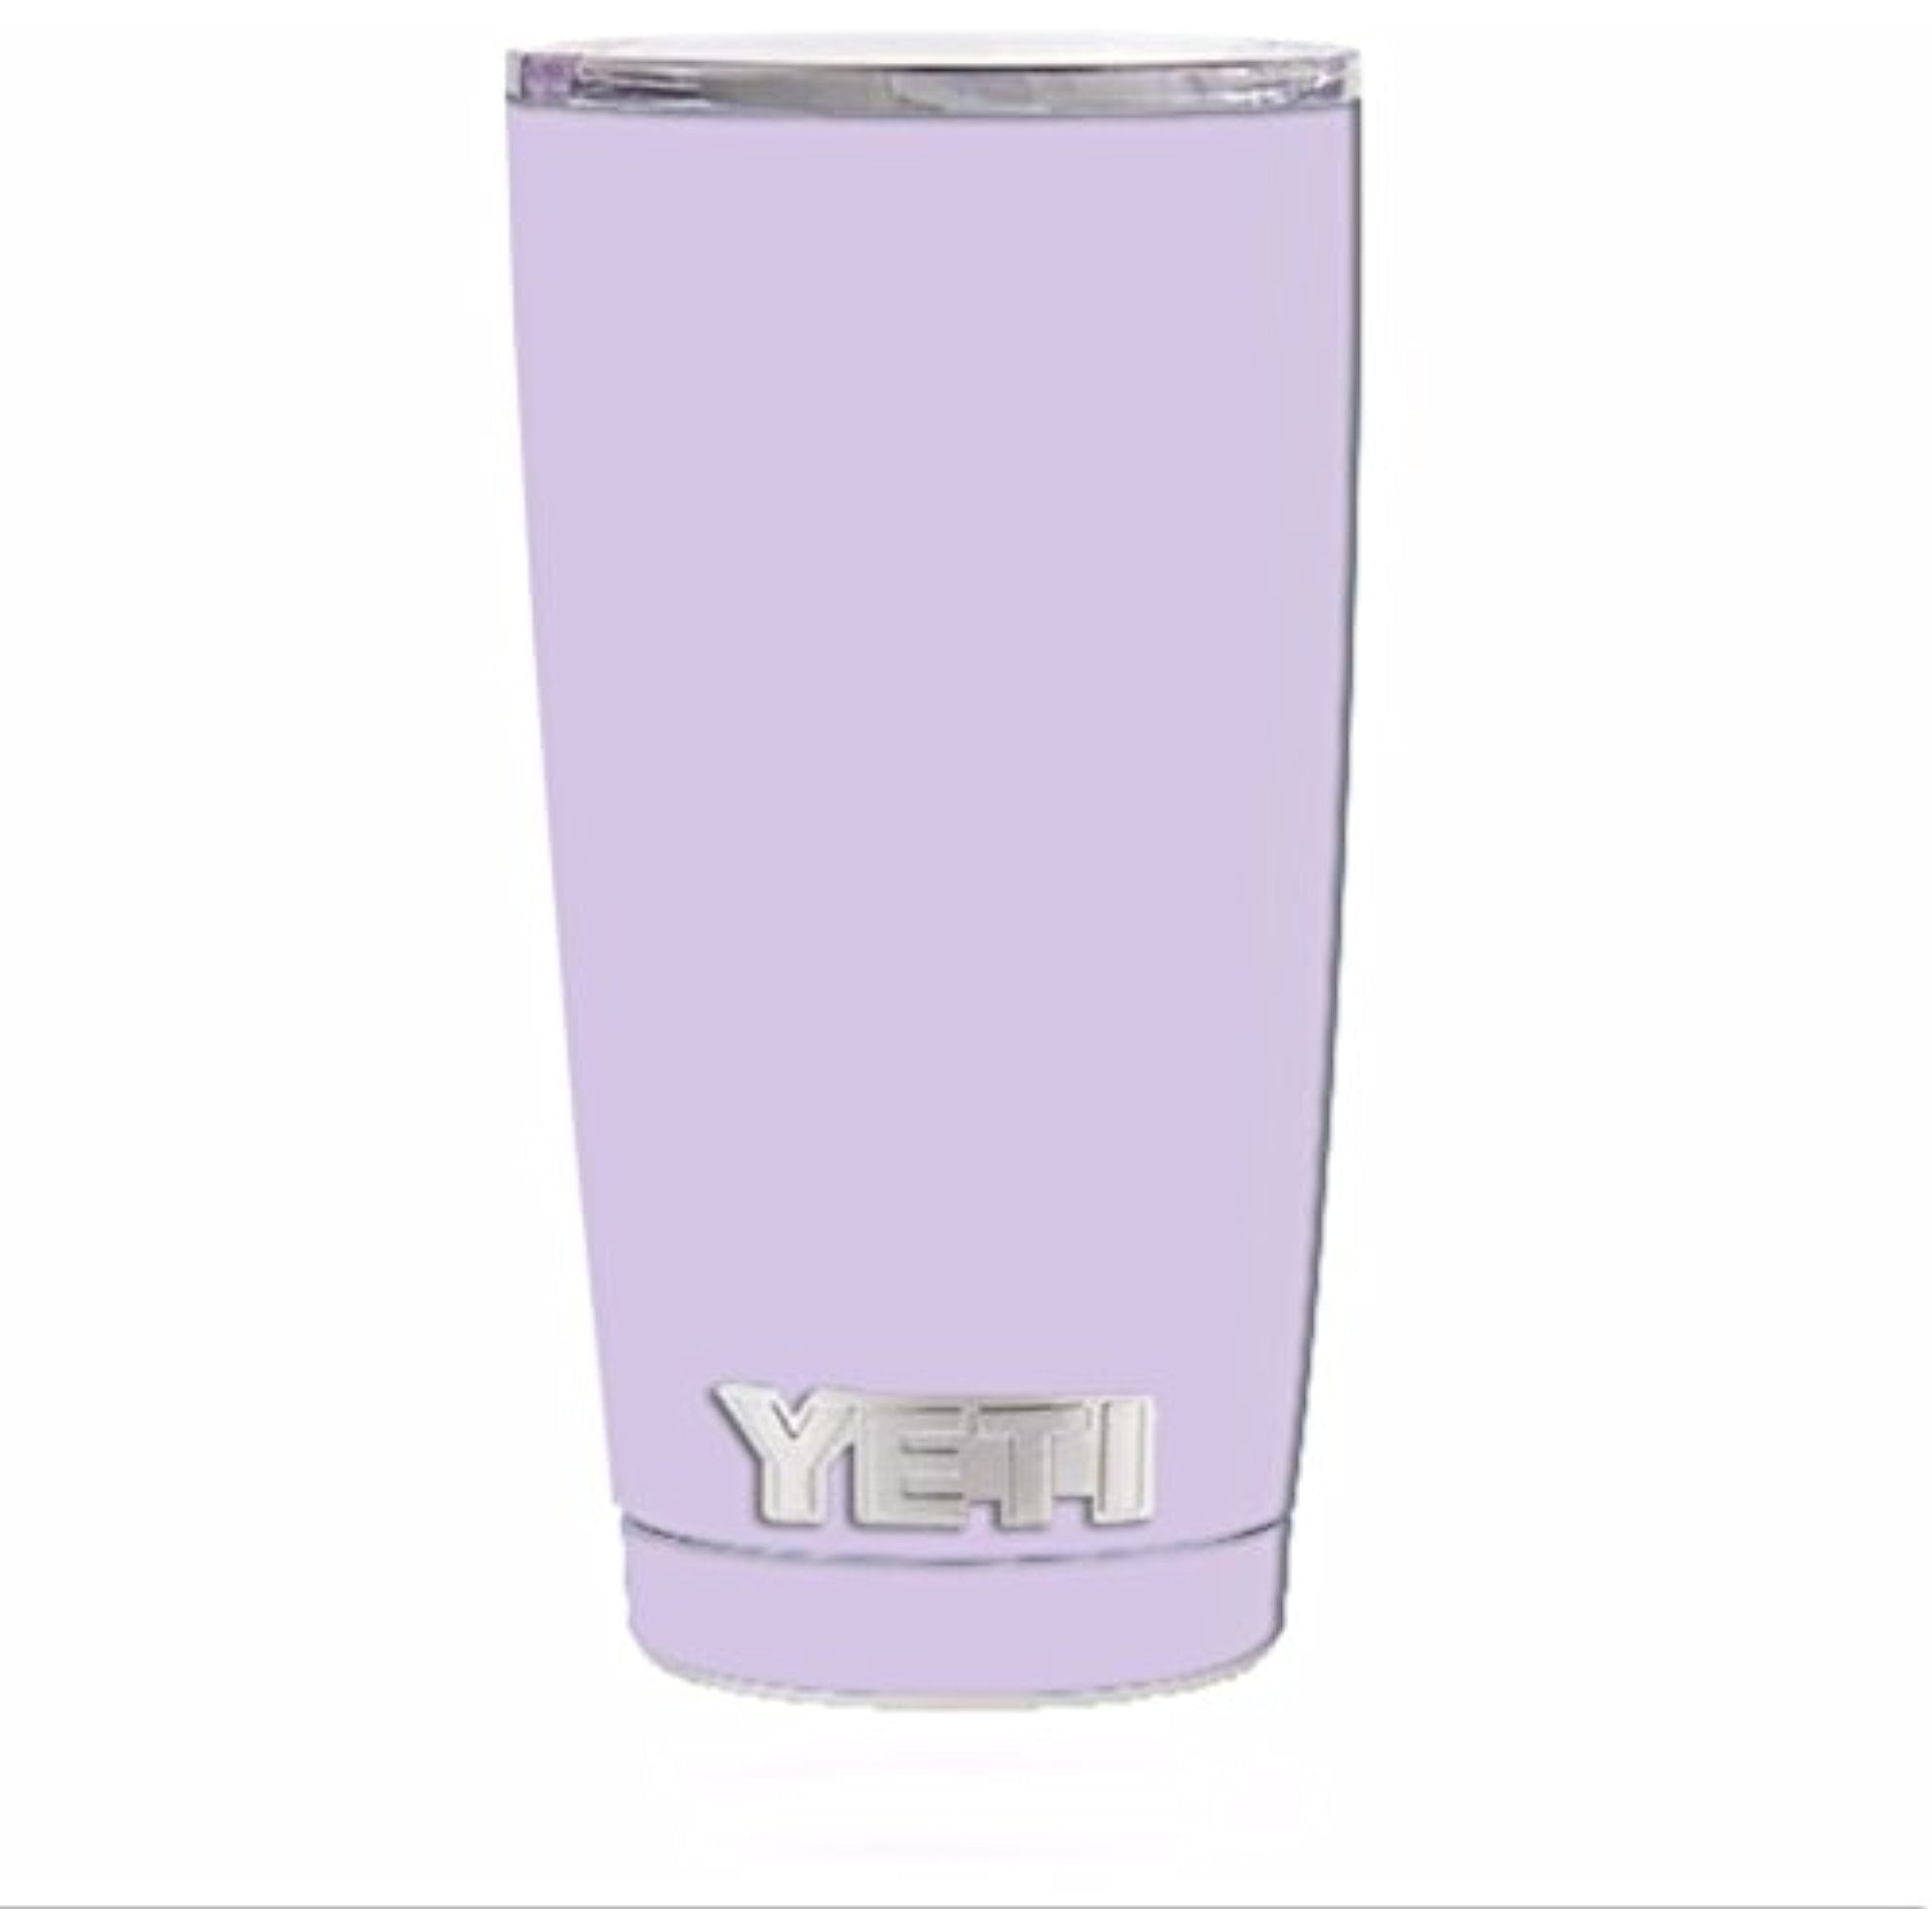 Skin Decal Vinyl Wrap for Yeti 20 oz Rambler Tumbler Stickers Skins Cover /  Solid Lilac, light purple